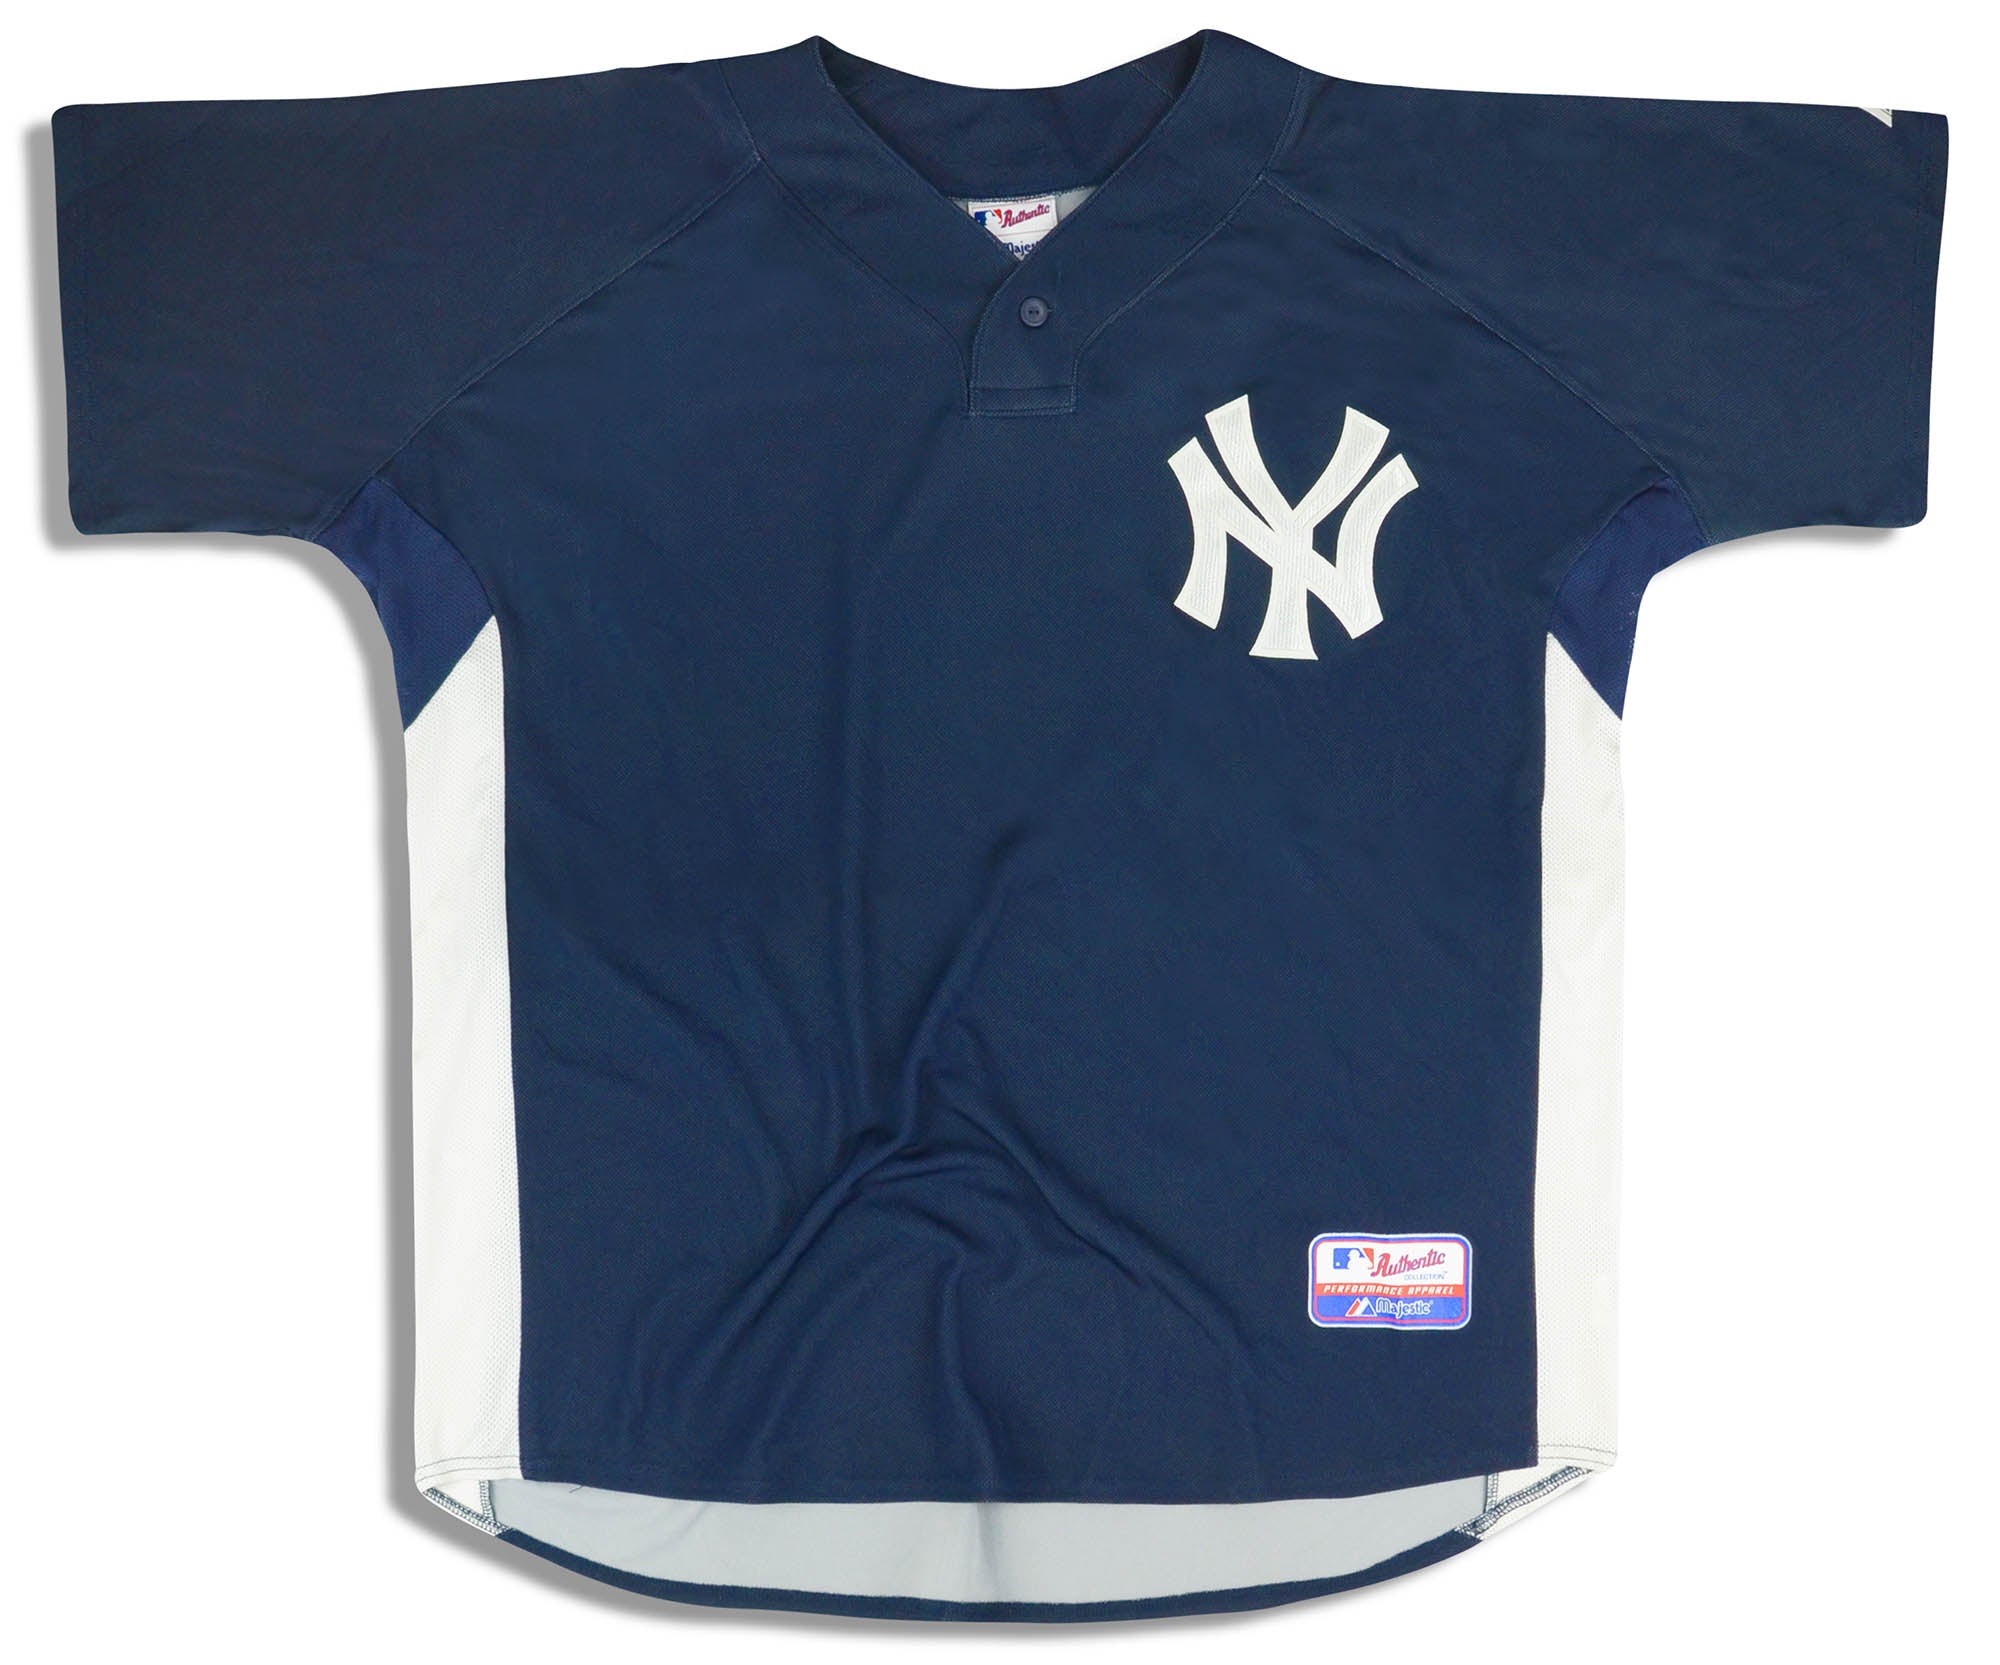 2015 NEW YORK YANKEES AUTHENTIC MAJESTIC BATTING PRACTICE JERSEY XL -  Classic American Sports